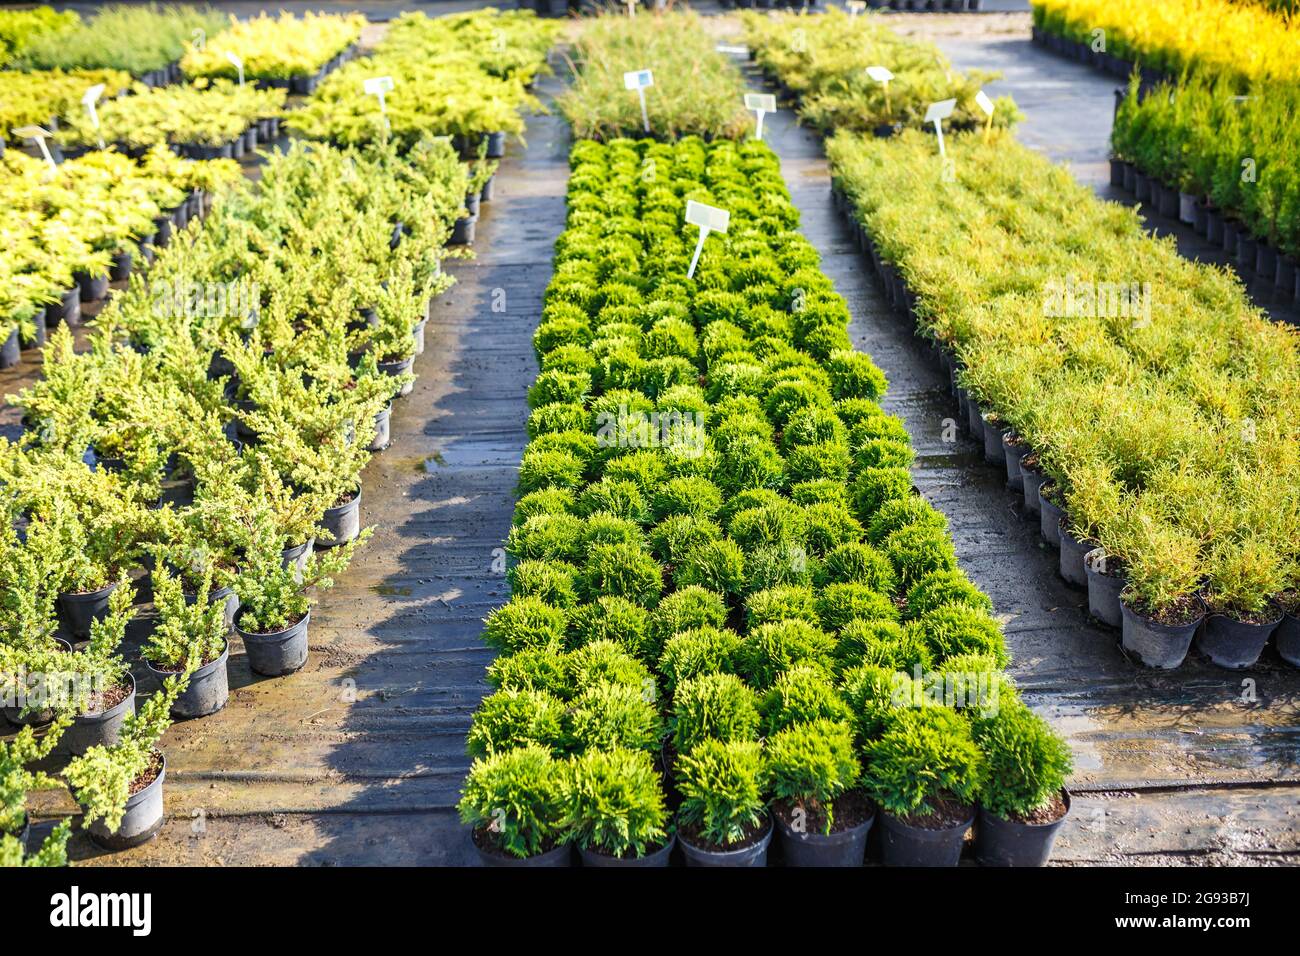 plantation of young conifers in greenhouse with a lot of plants Stock Photo